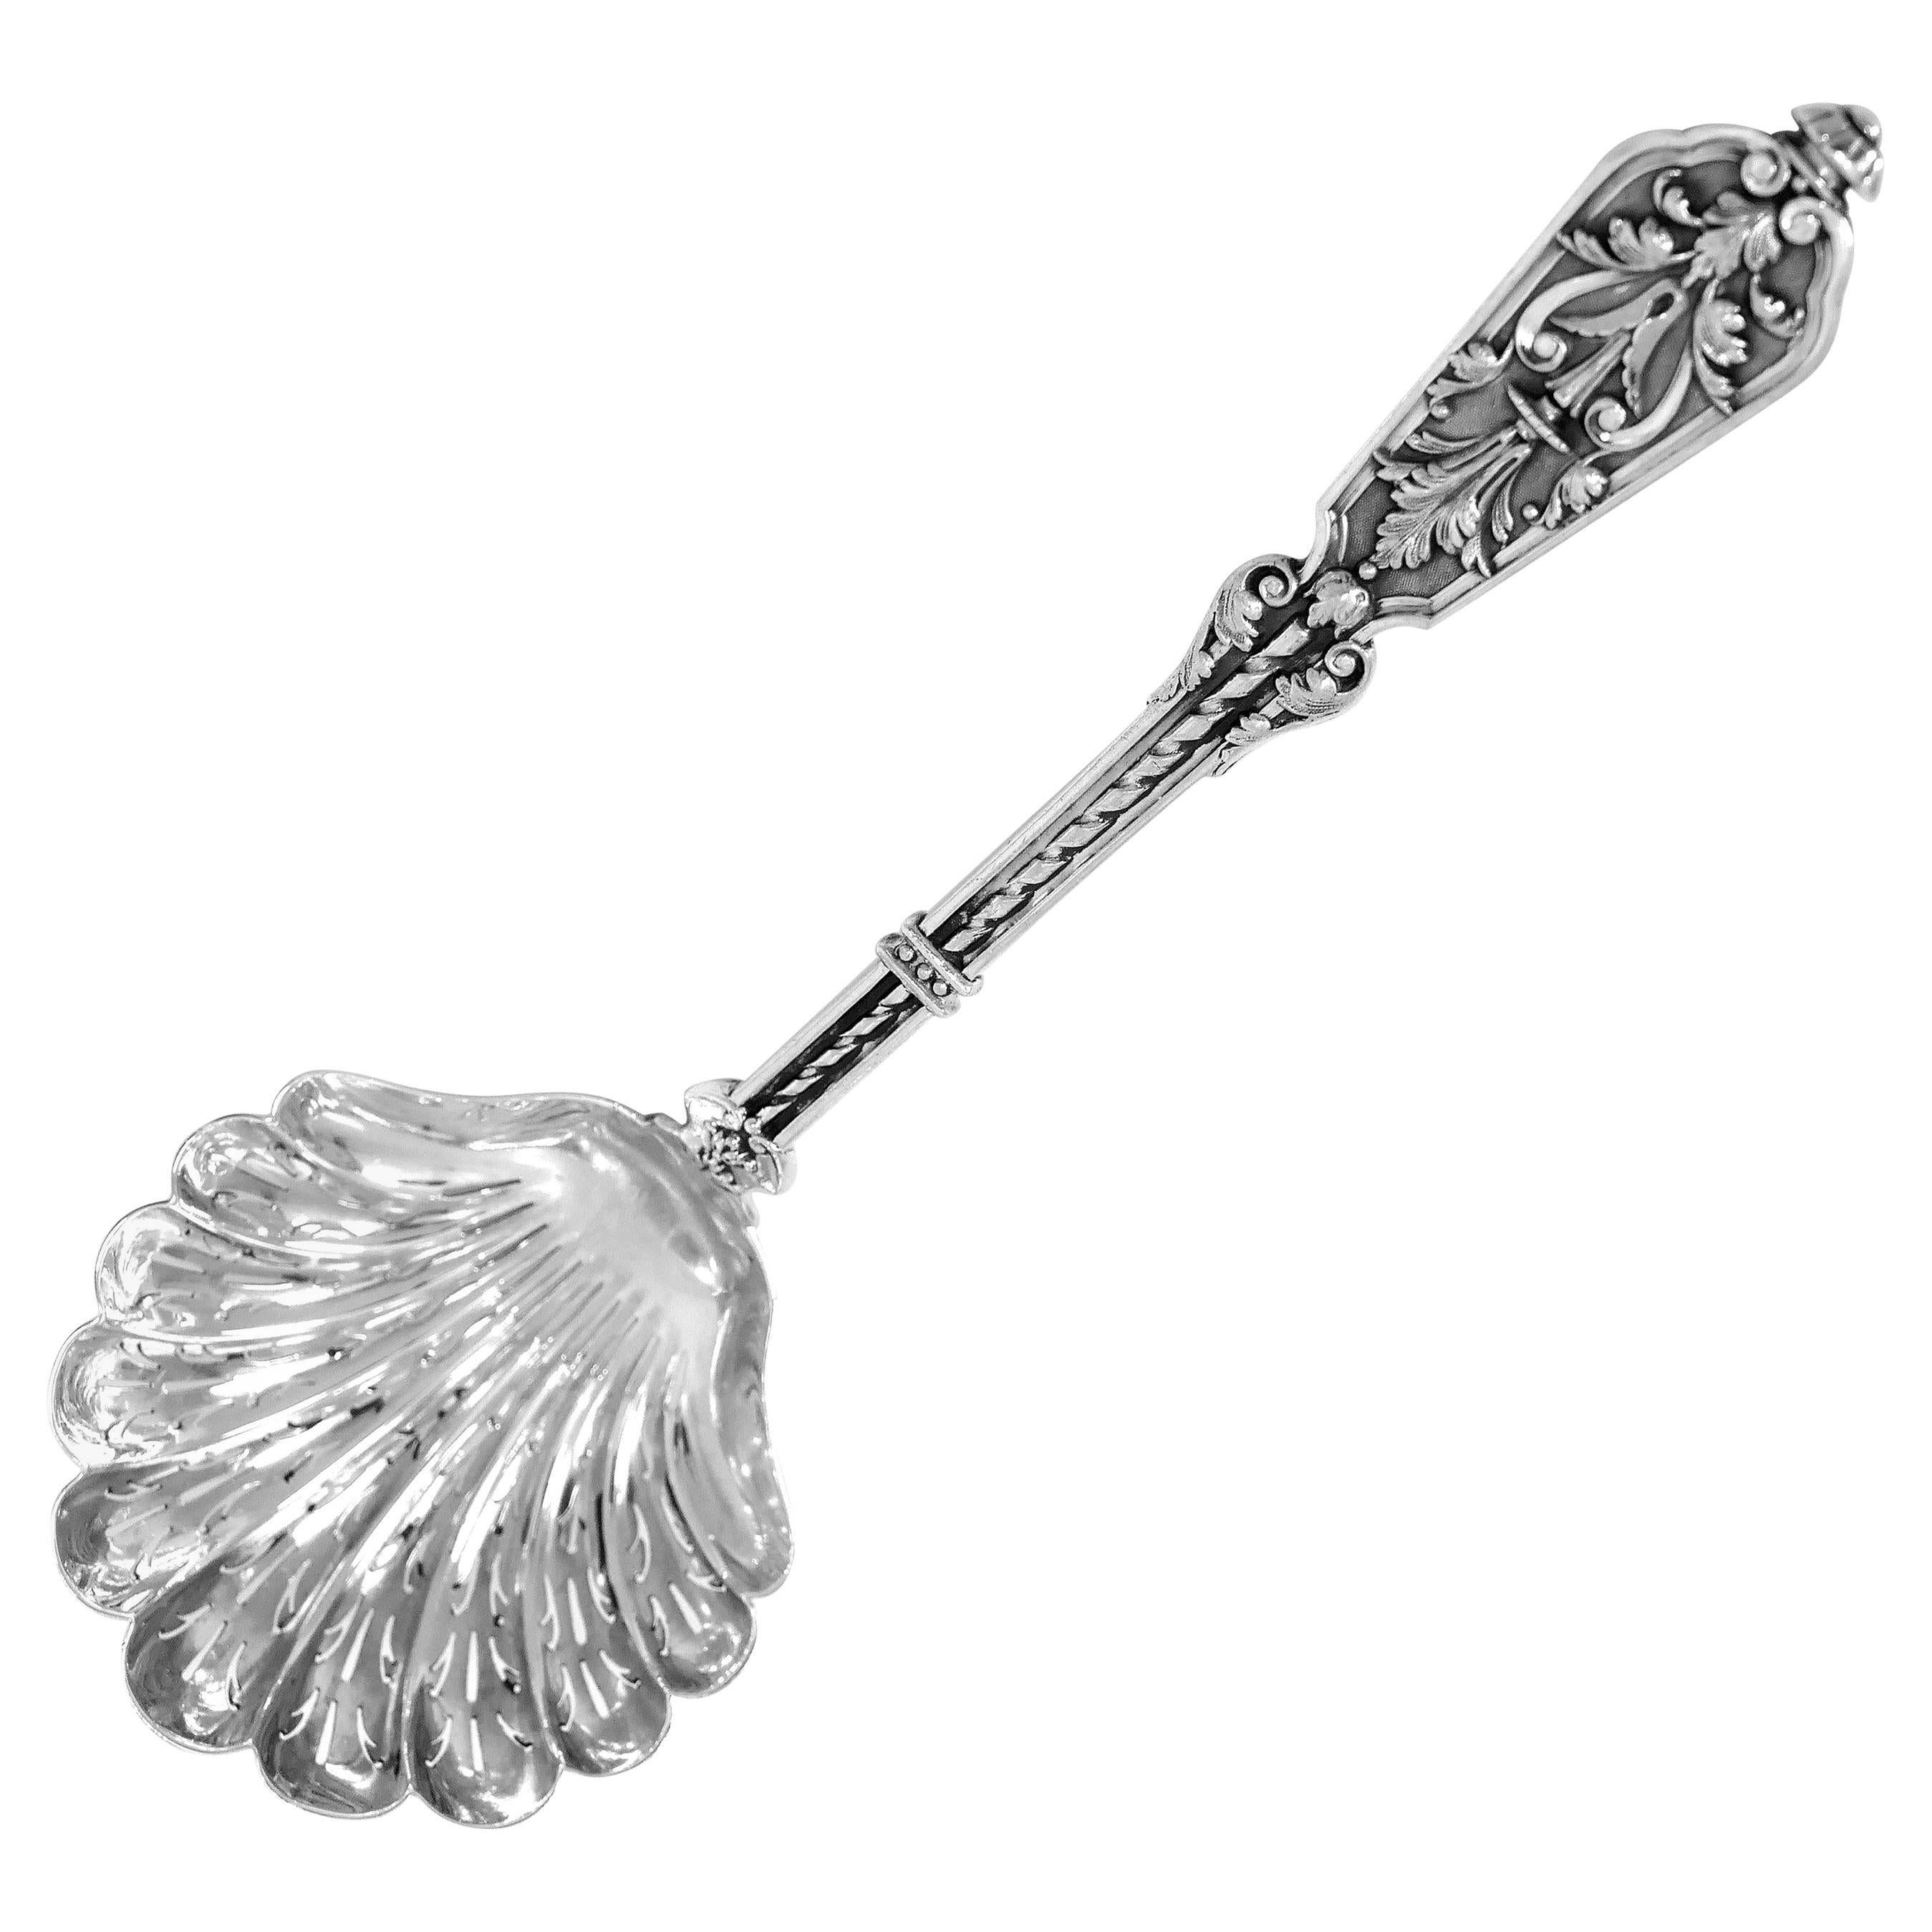 Puiforcat Rare French Sterling Silver Sugar Sifter Spoon, Renaissance For Sale